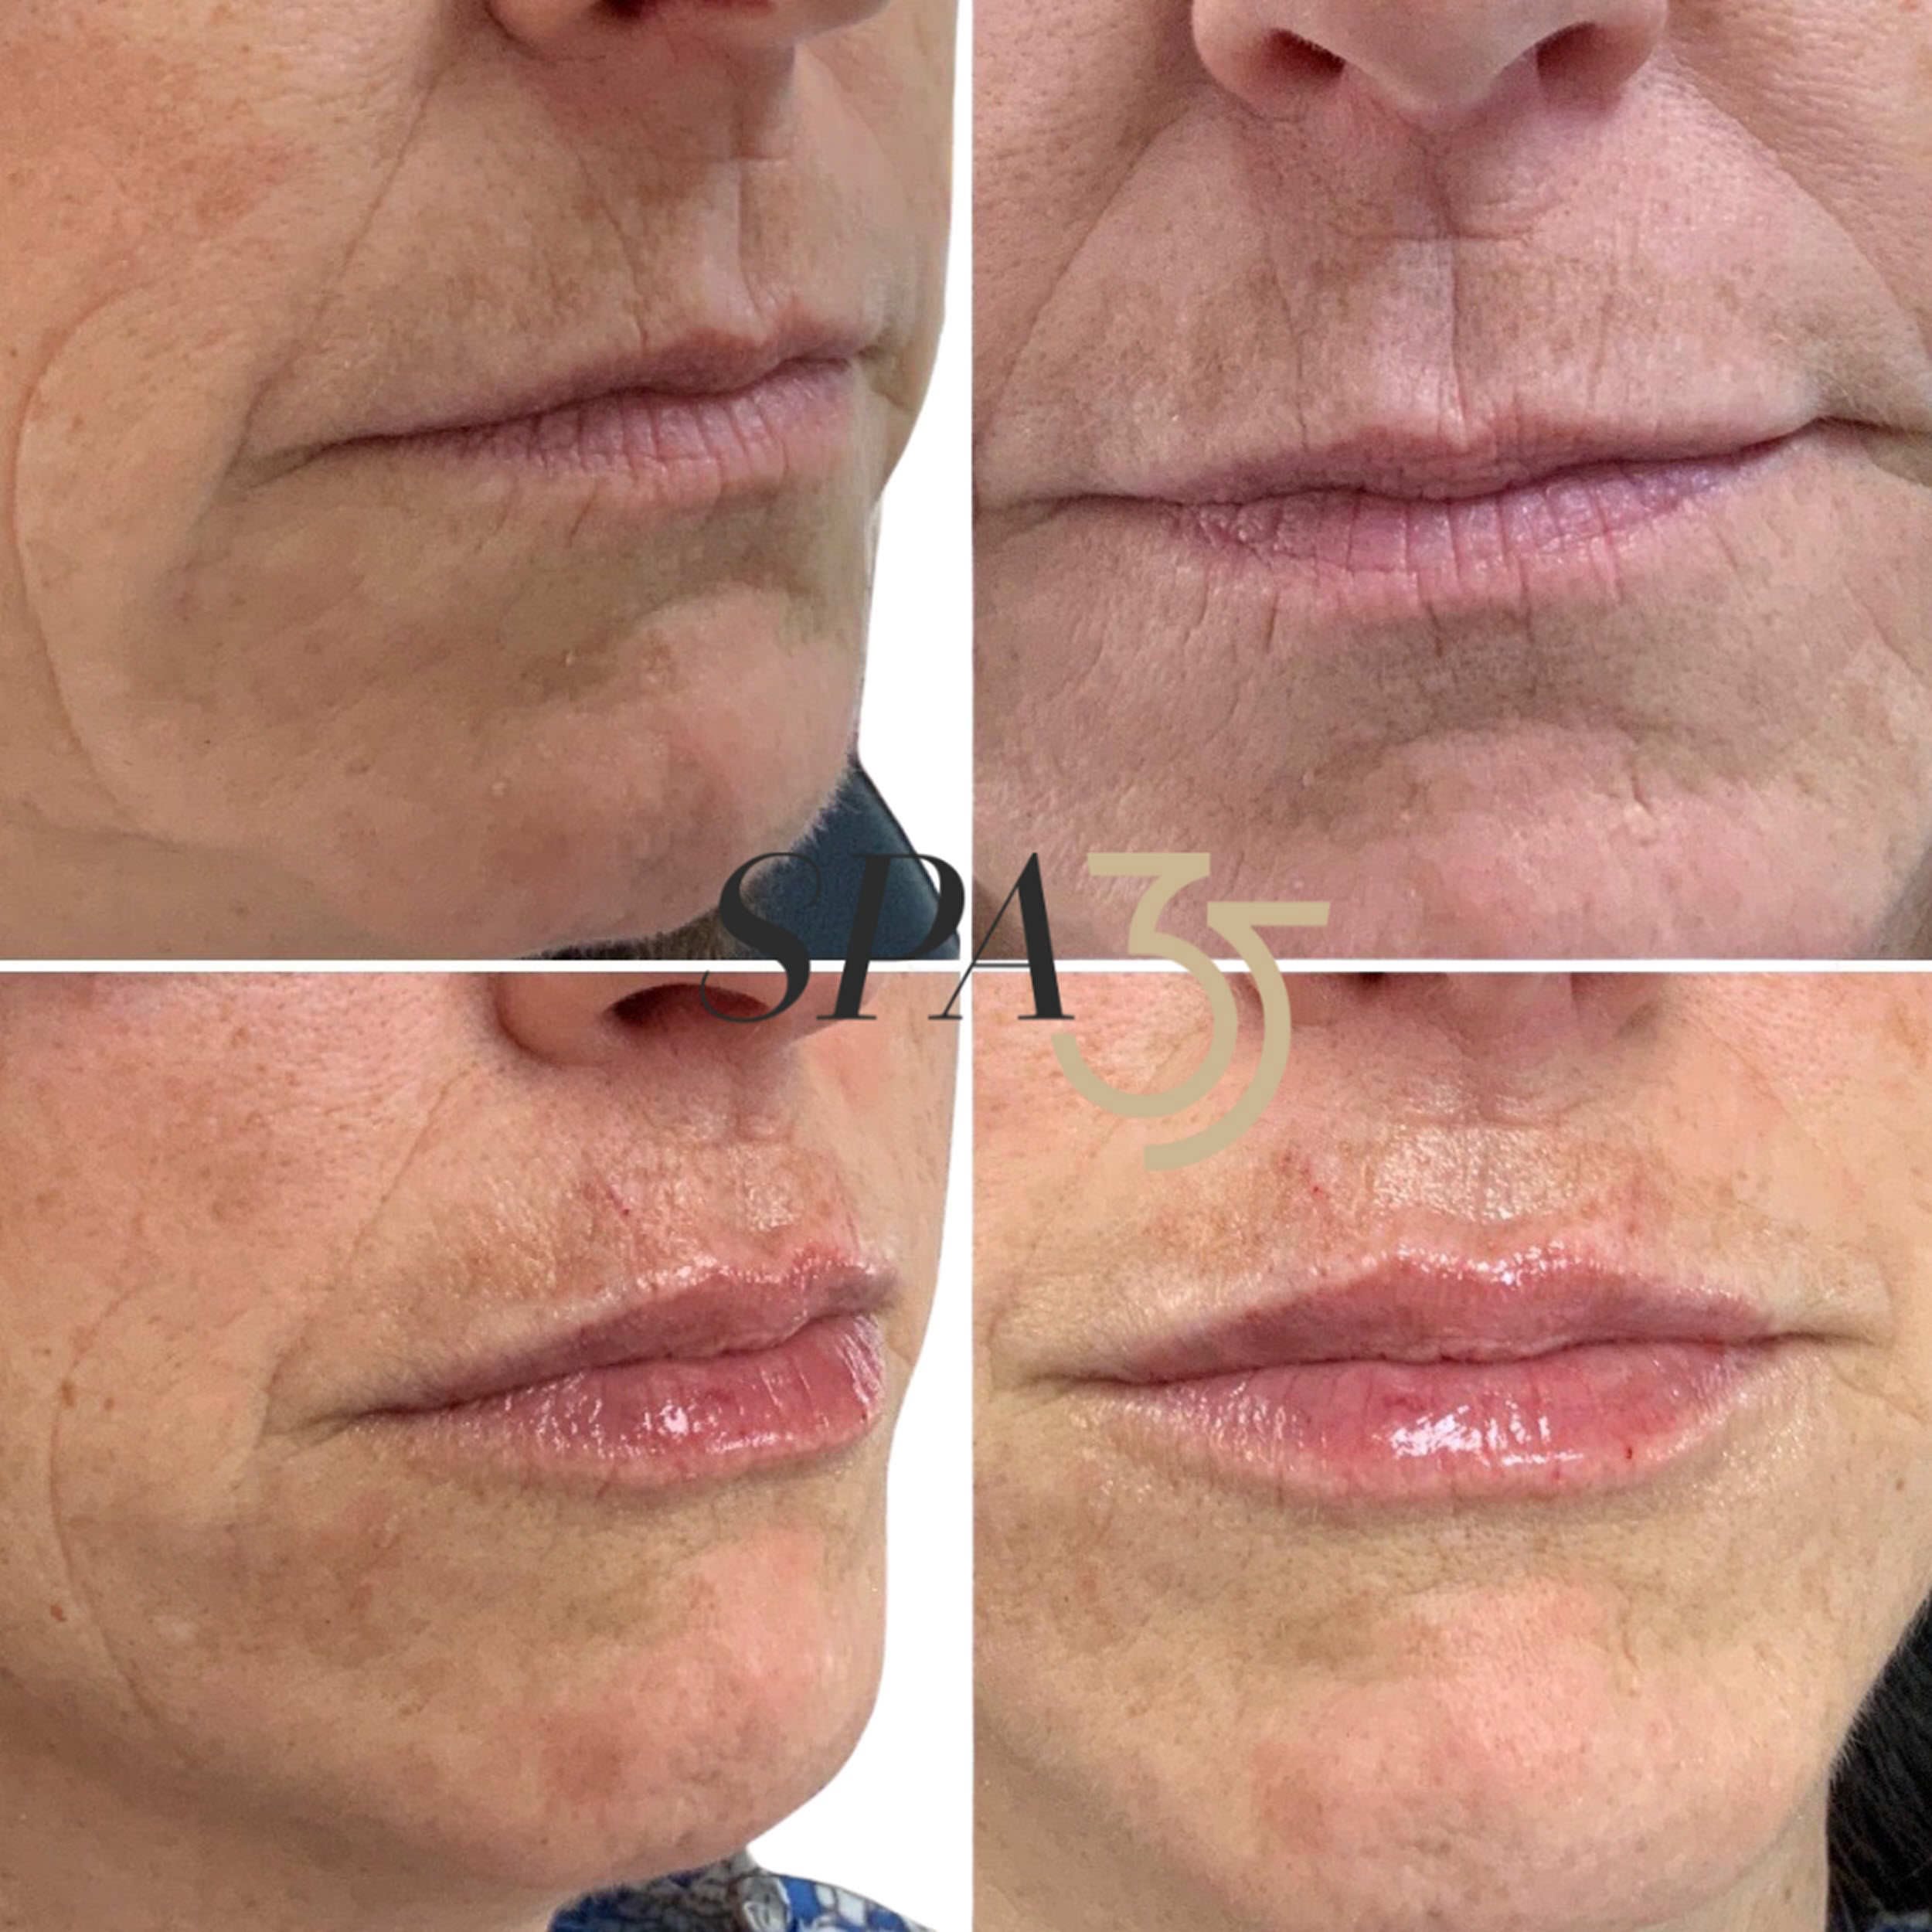 Before and after photos of hyaluronic acid based dermal fillers